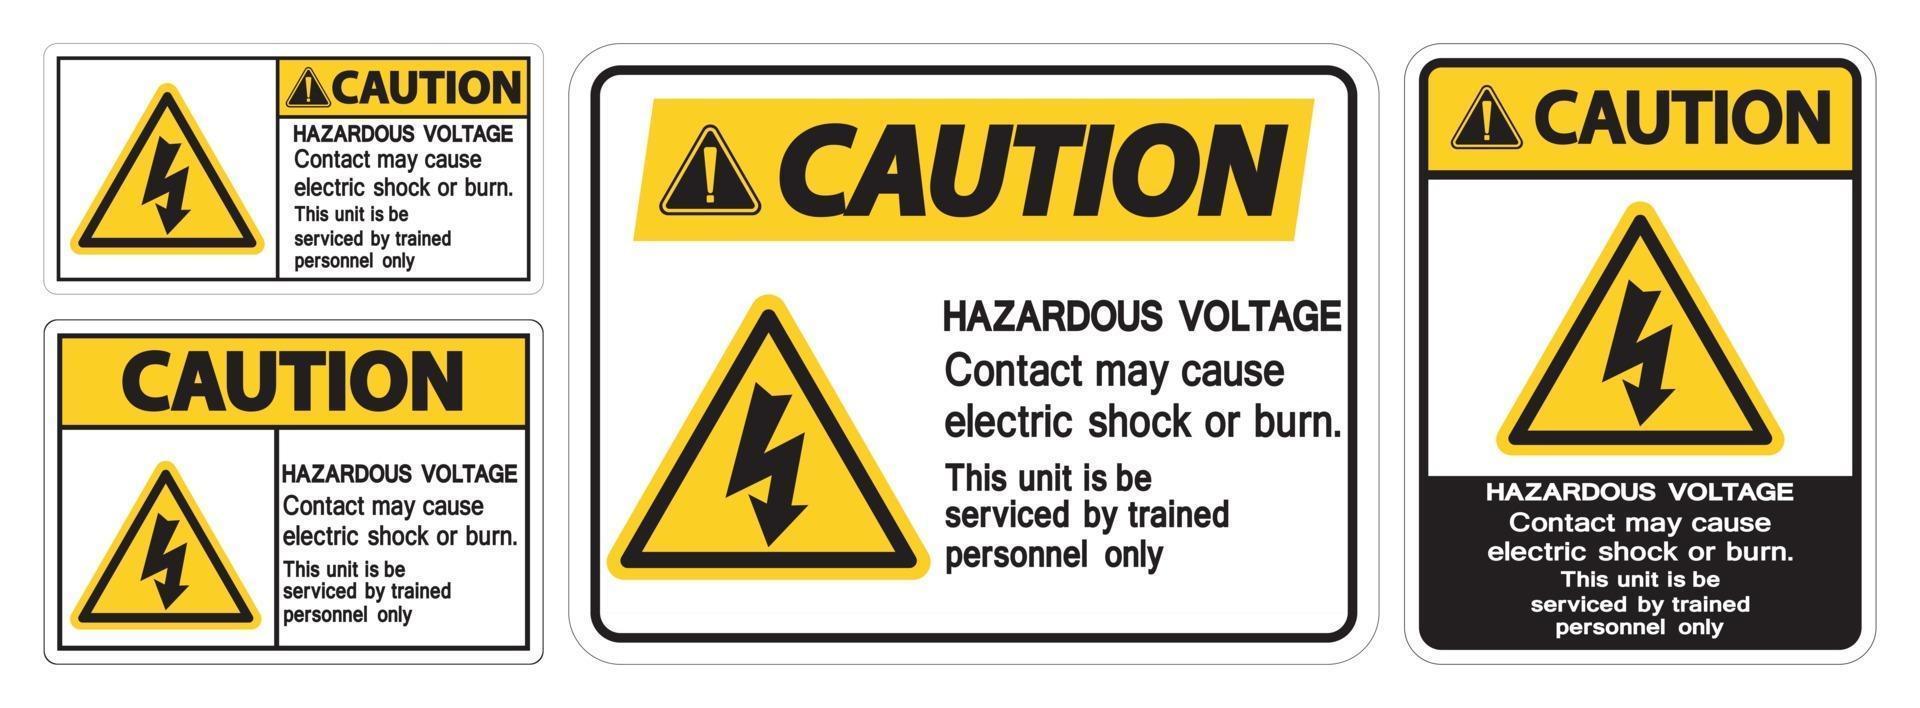 Caution Hazardous Voltage Contact May Cause Electric Shock Or Burn Sign On White Background vector